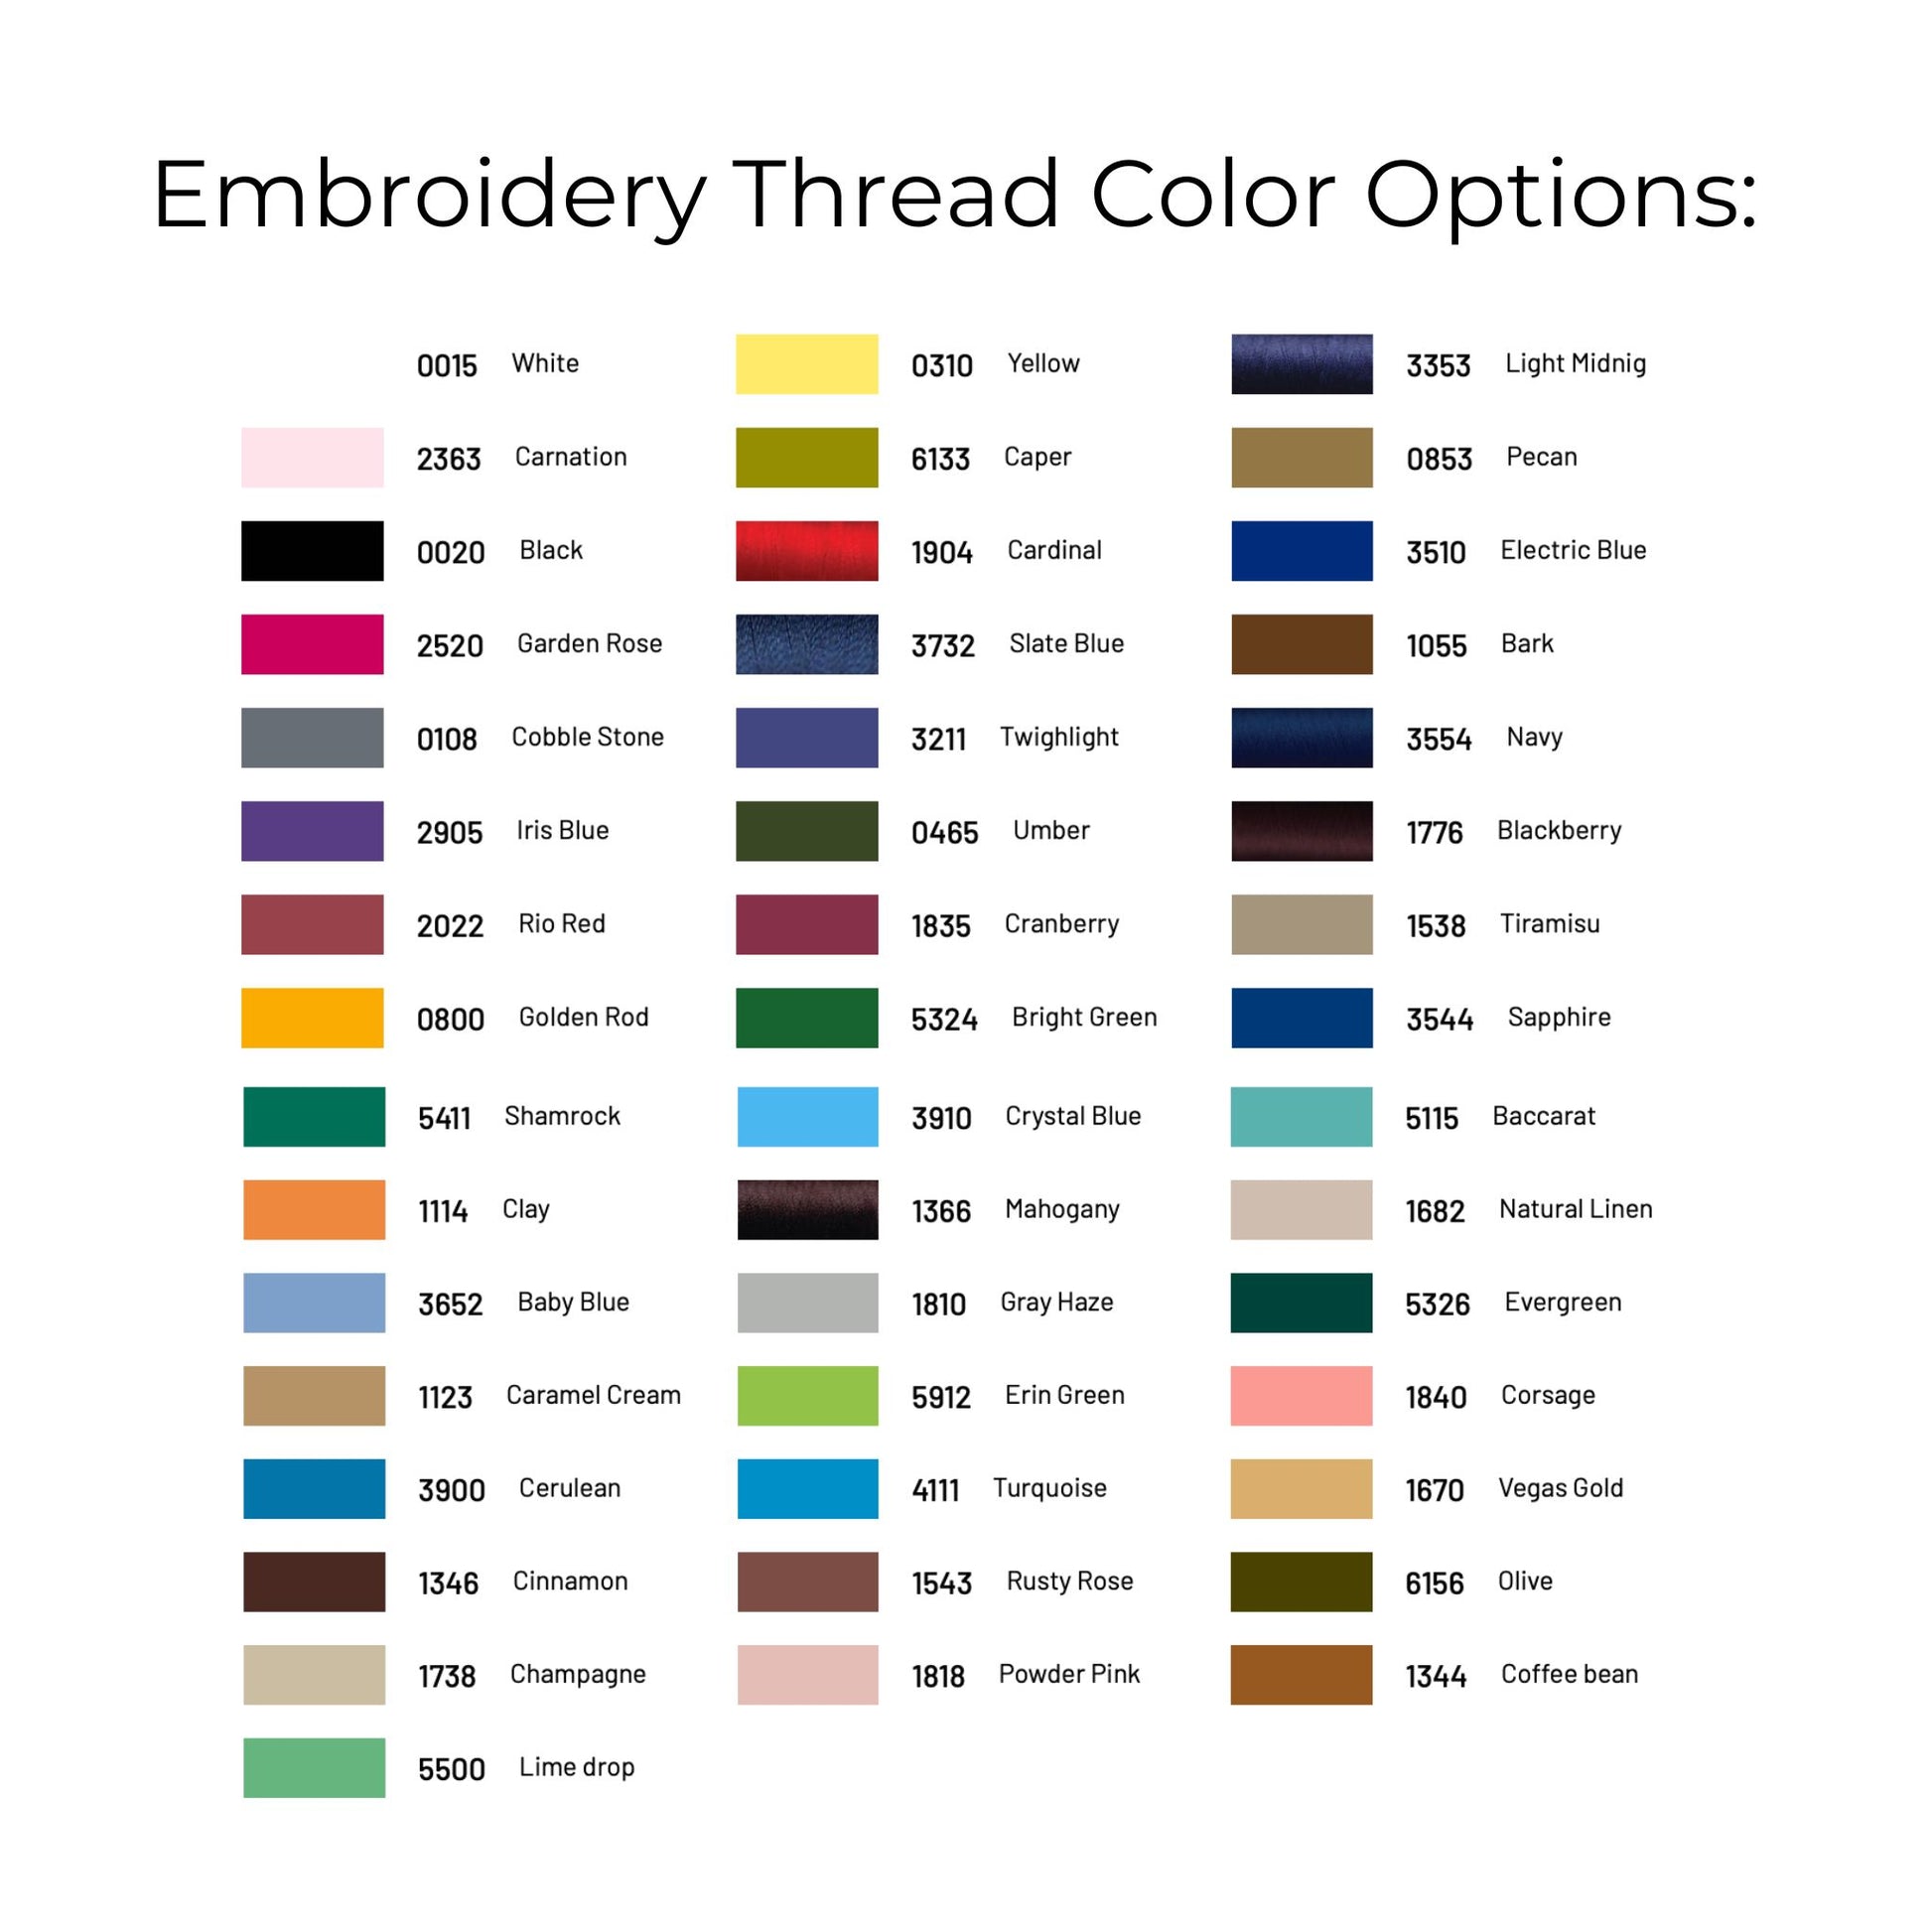 Embroidery font colors by Winston's Collection